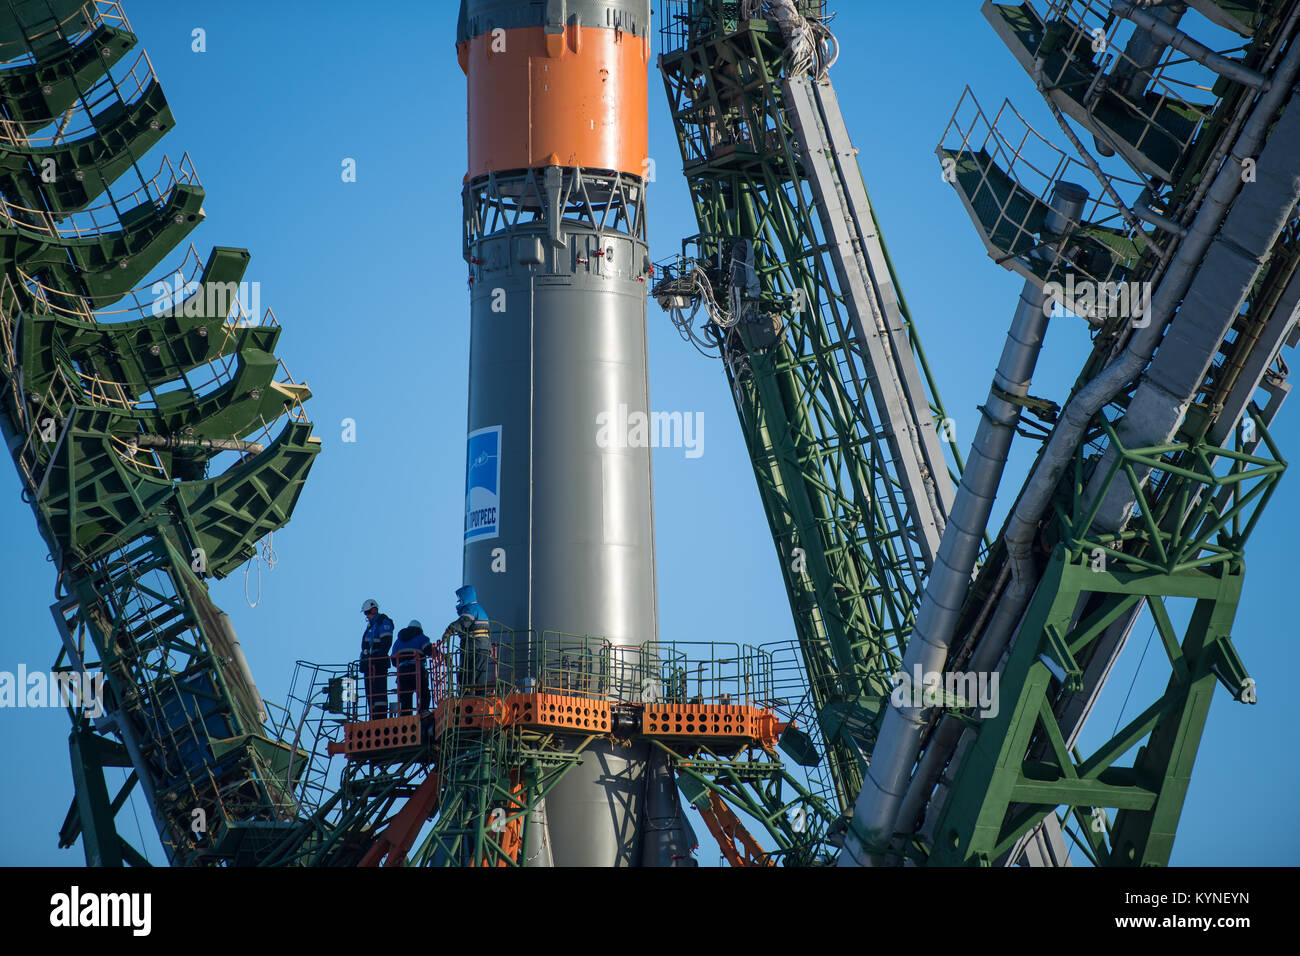 Workers are seen on a gantry as the service structure arms are raised around the Soyuz rocket, Friday, Dec. 15, 2017 at the Baikonur Cosmodrome in Kazakhstan. Expedition 54 Soyuz Commander Anton Shkaplerov of Roscosmos, flight engineer Scott Tingle of NASA, and flight engineer Norishige Kanai of Japan Aerospace Exploration Agency (JAXA) are scheduled to launch at 2:21 a.m. Eastern Time (1:21 p.m. Baikonur time) on Dec. 17 and will spend the next five months living and working aboard the International Space Station.  Photo Credit: (NASA/Joel Kowsky) Stock Photo